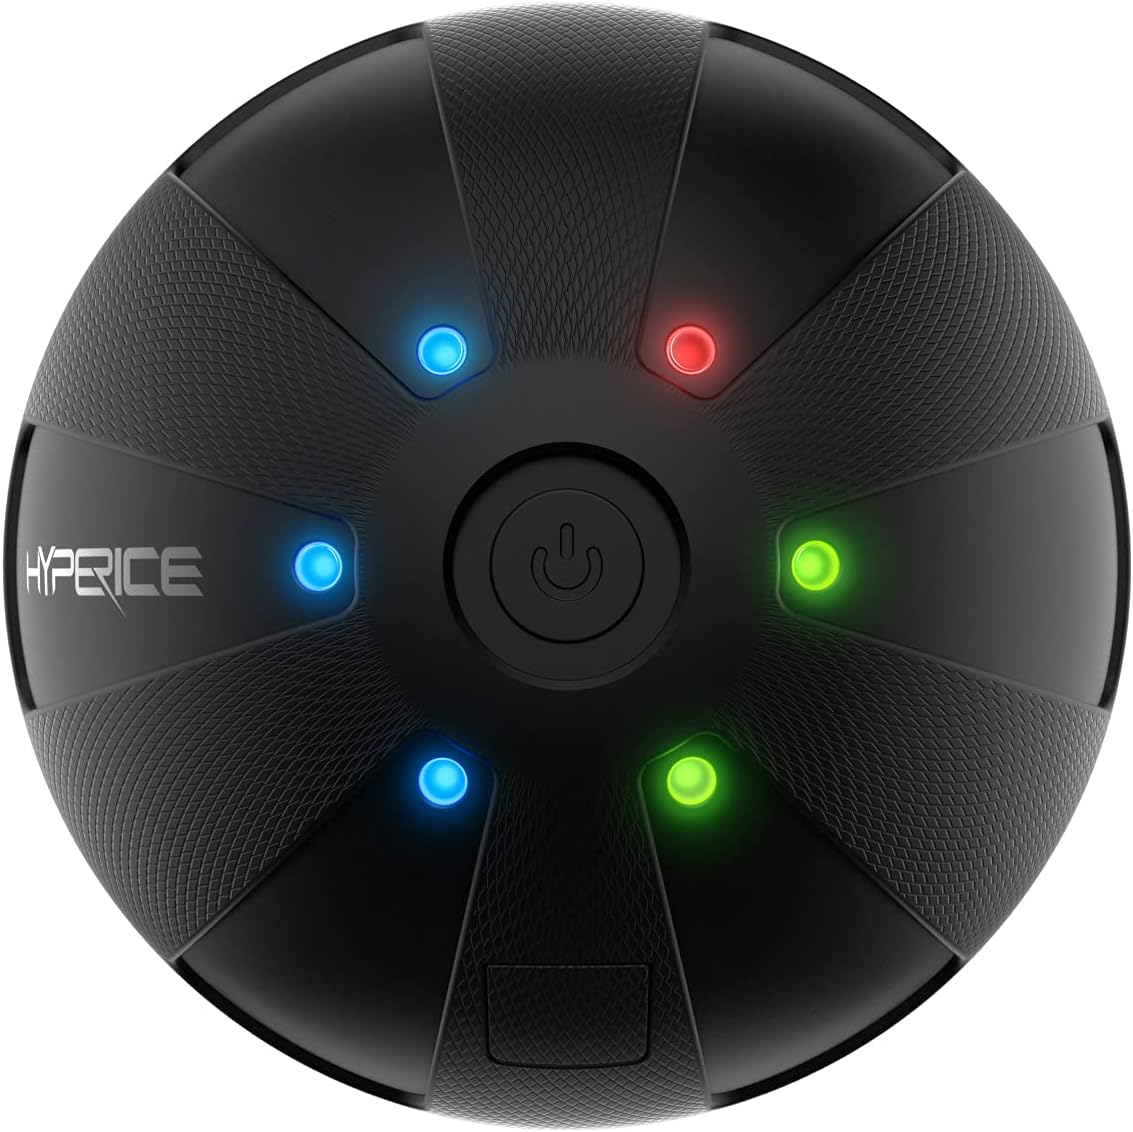 Featured Image for Hyperice Hypersphere – Portable Vibrating Massage Ball for Muscle Recovery and Soreness Relief – FSA/HSA Eligible